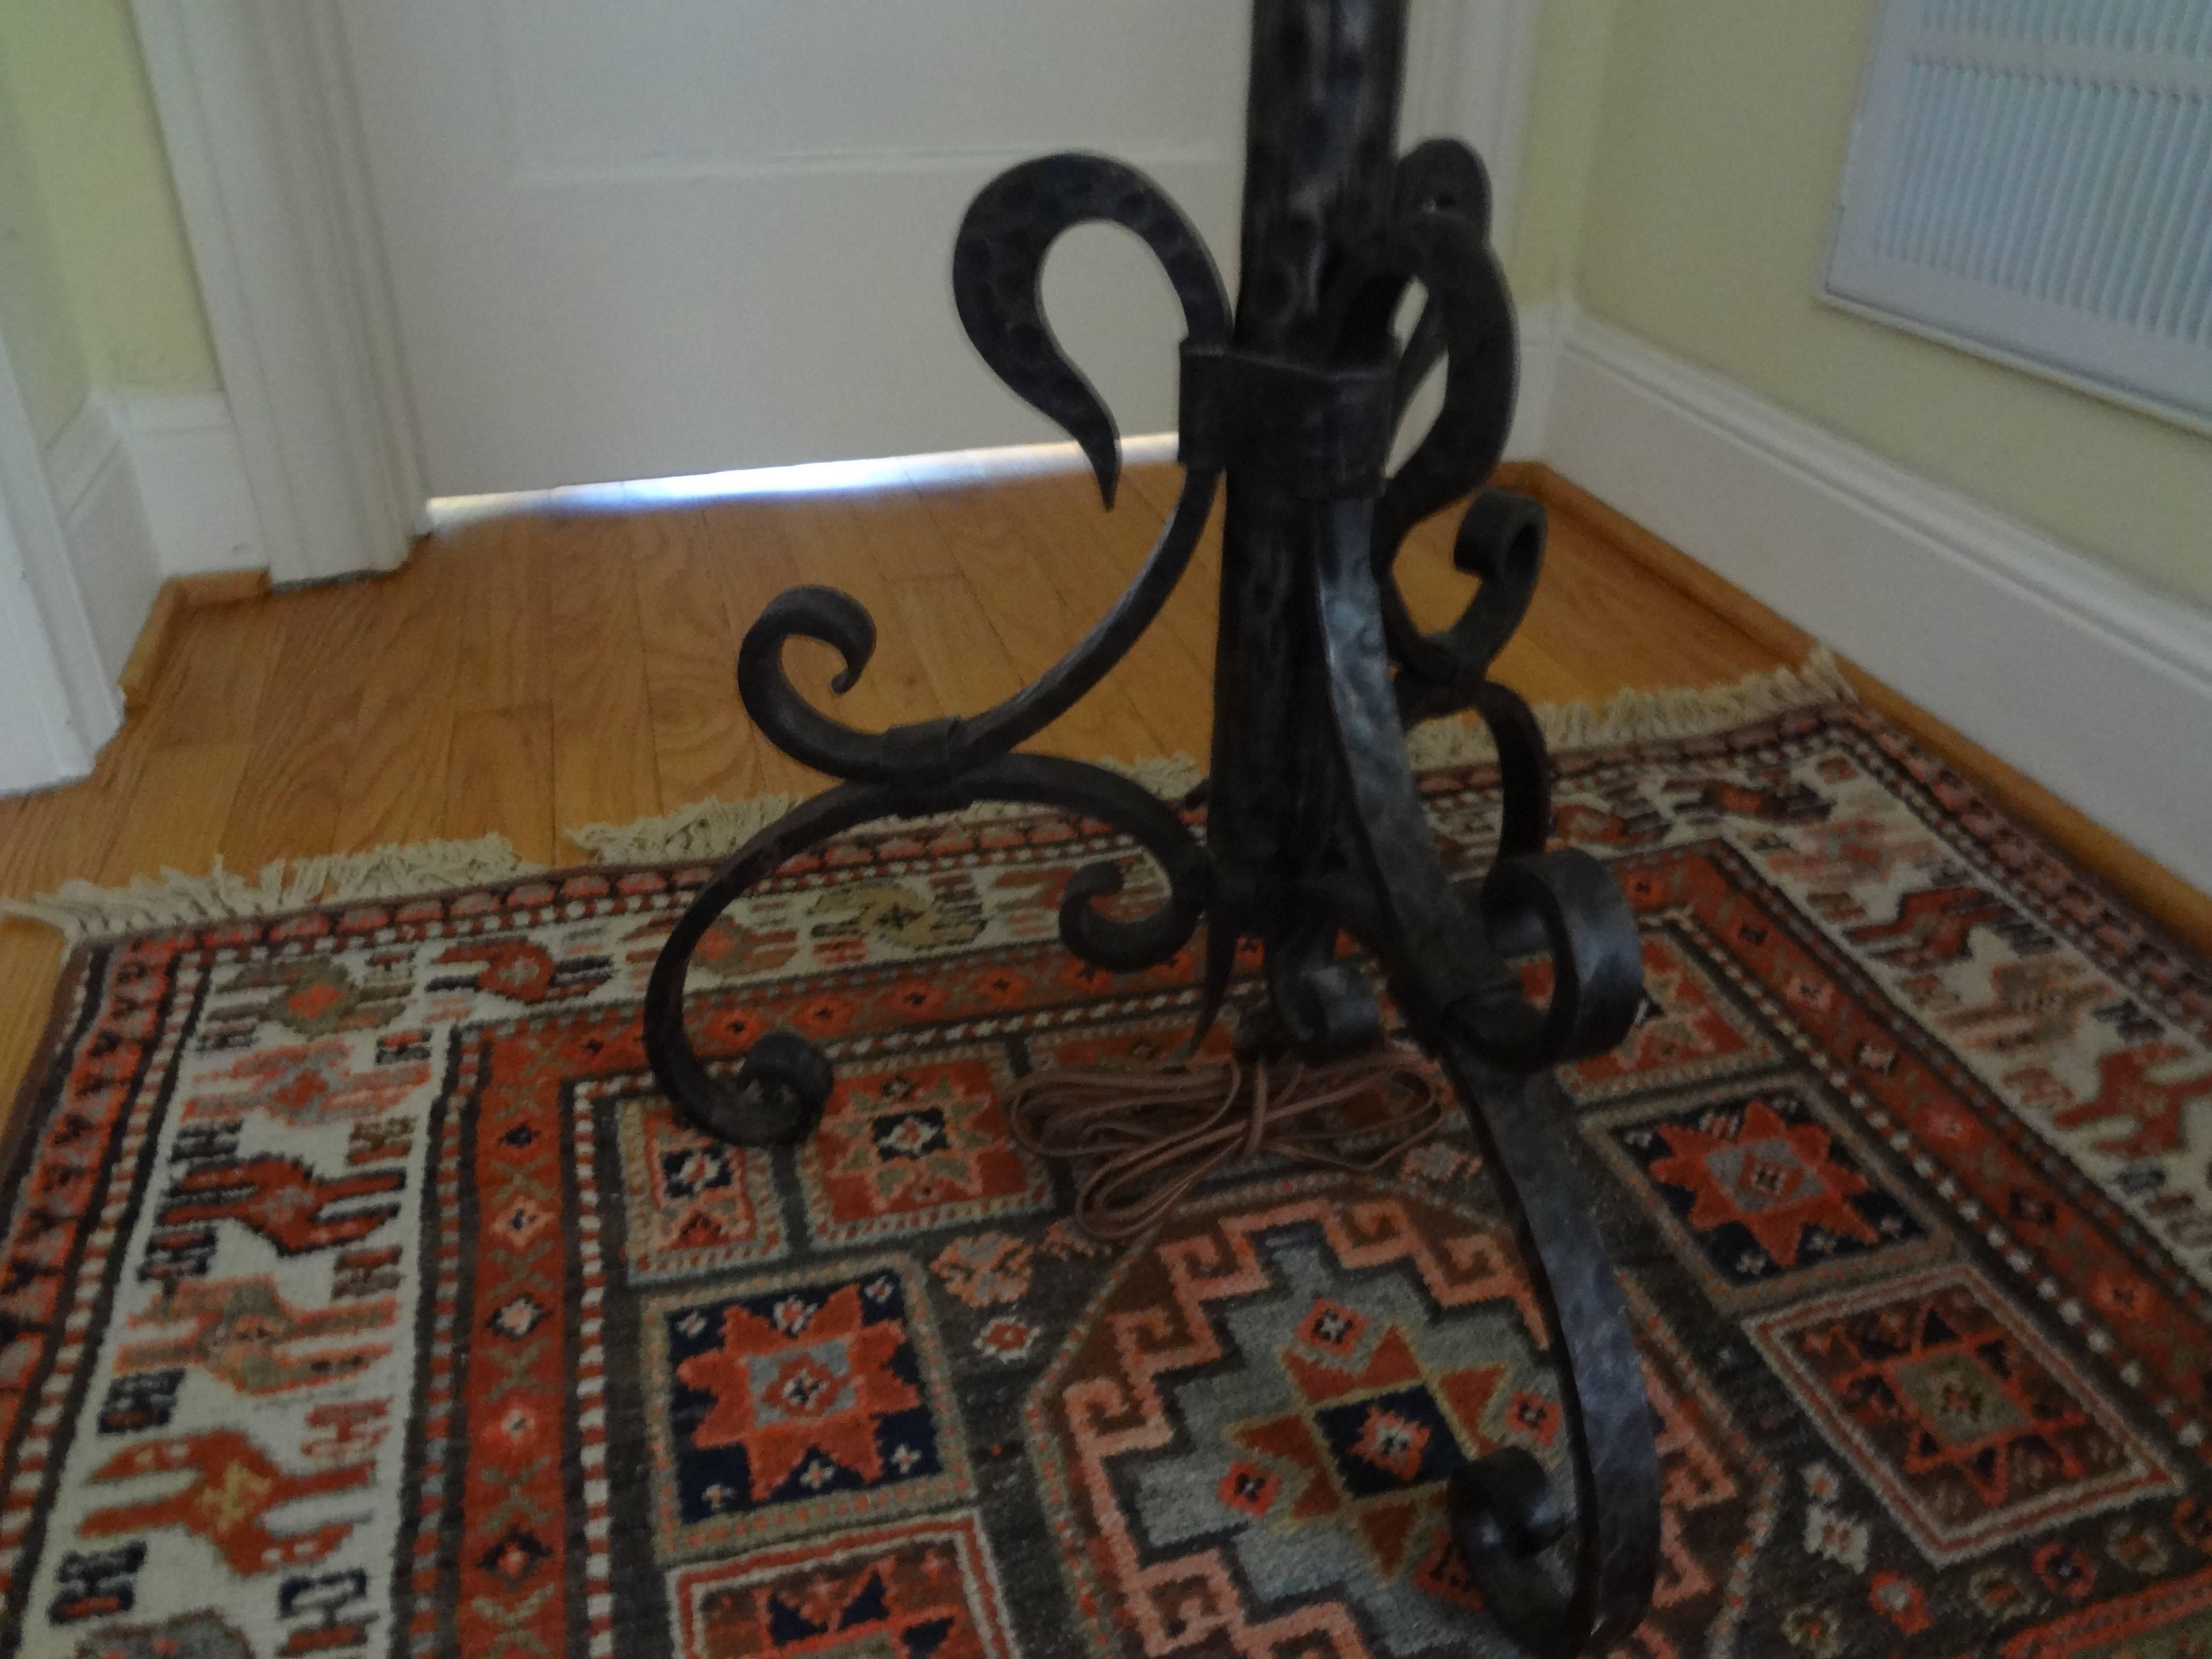 Pair of French wrought iron floor lamps inspired by Gilbert Poillerat.
Chic matched pair of French Art Deco hand forged wrought iron standing lamps newly wired for U.S. market. This great pair of French wrought iron floor lamps are in the style of